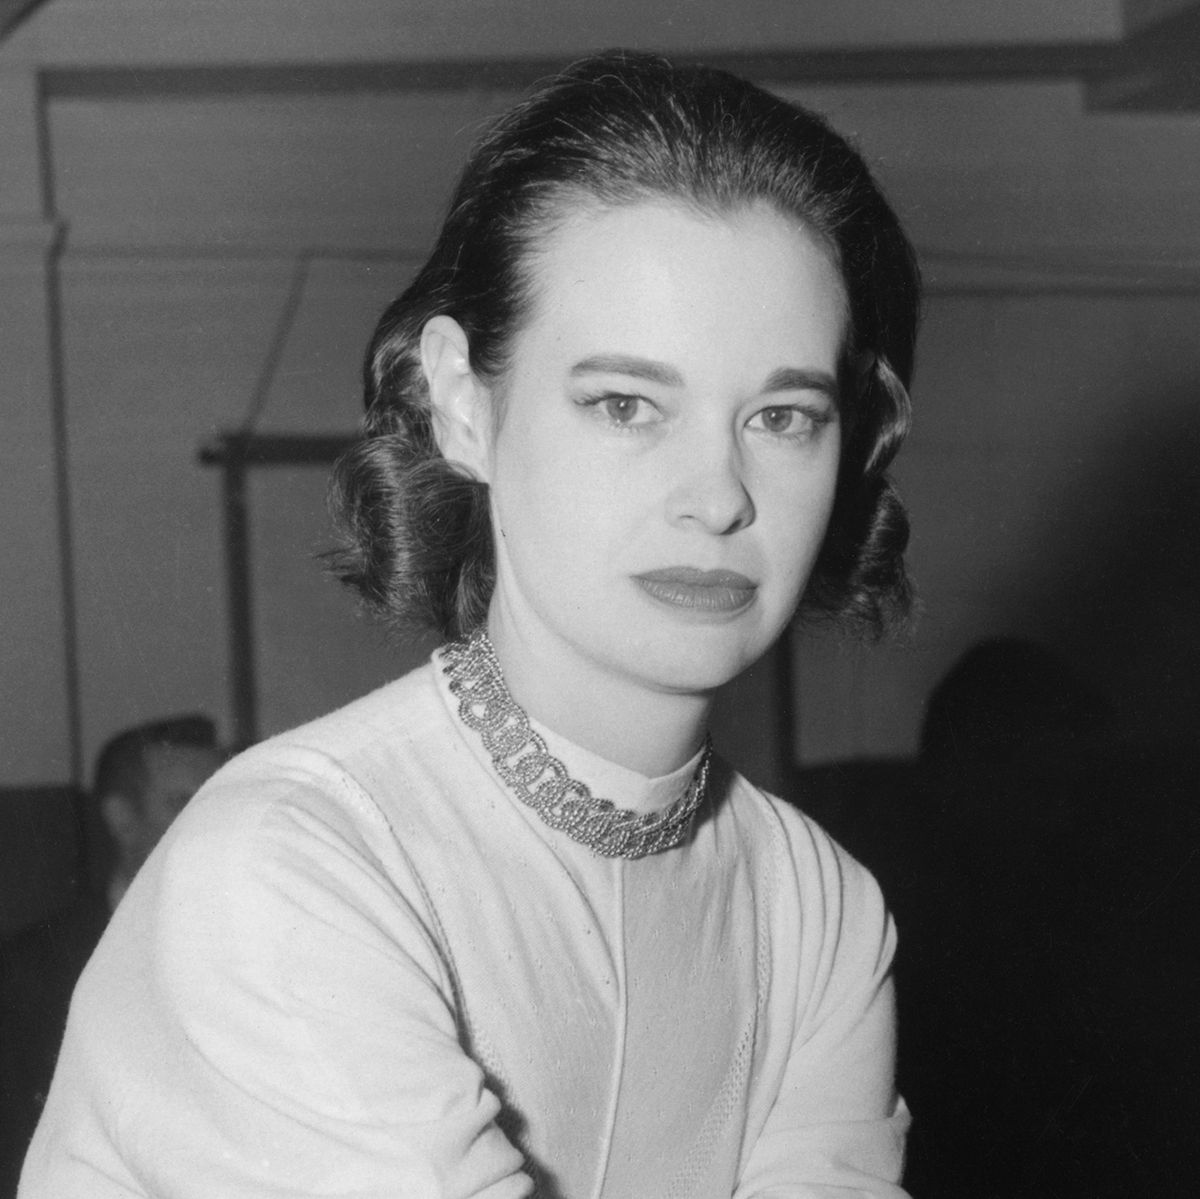 Gloria VanderbiltAmerican socialite, fashion designer, actress, writer and artist Gloria Vanderbilt, January 1955. She is holding a copy of the Pulitzer Prize-winning play 'The Time of Your Life' by William Saroyan. (Photo by Archive Photos/Getty Images)